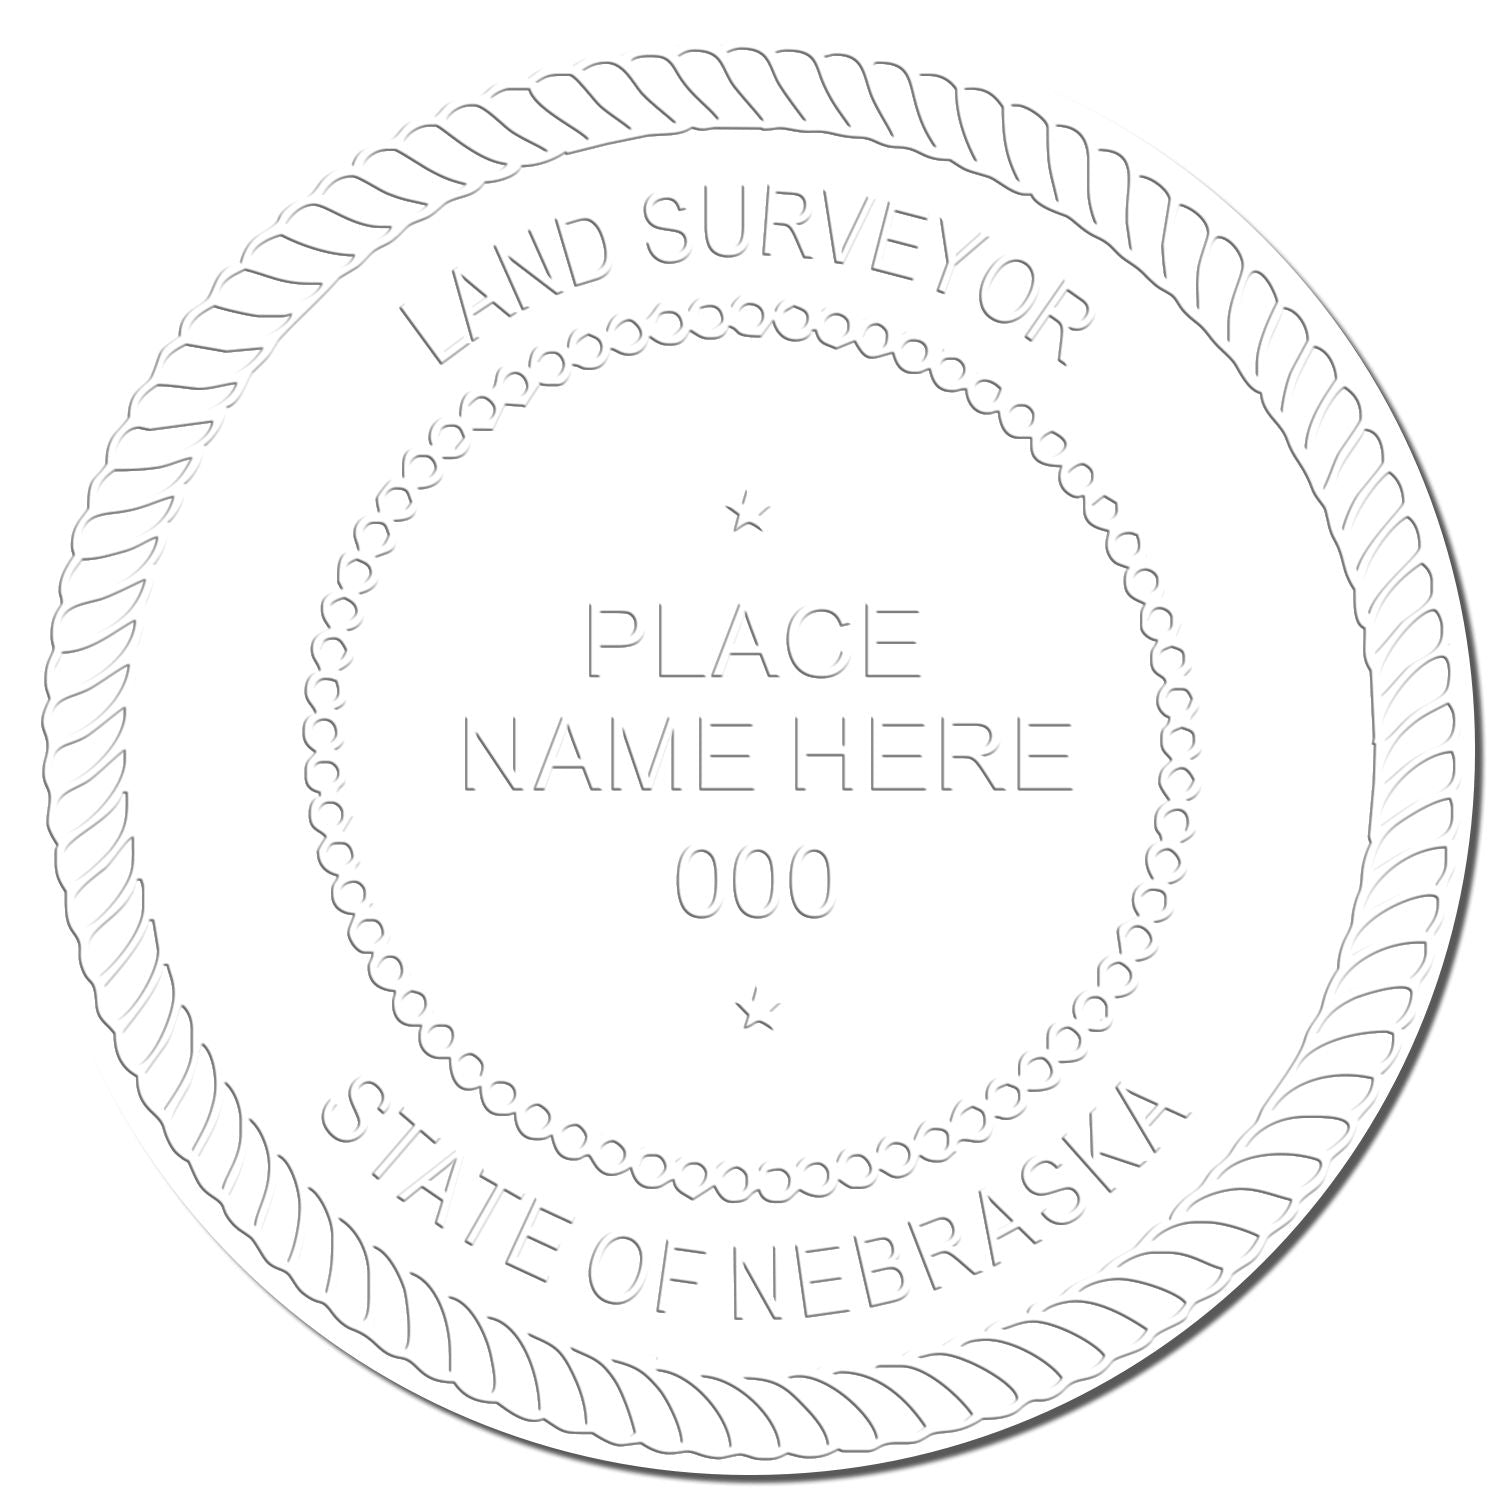 This paper is stamped with a sample imprint of the Long Reach Nebraska Land Surveyor Seal, signifying its quality and reliability.